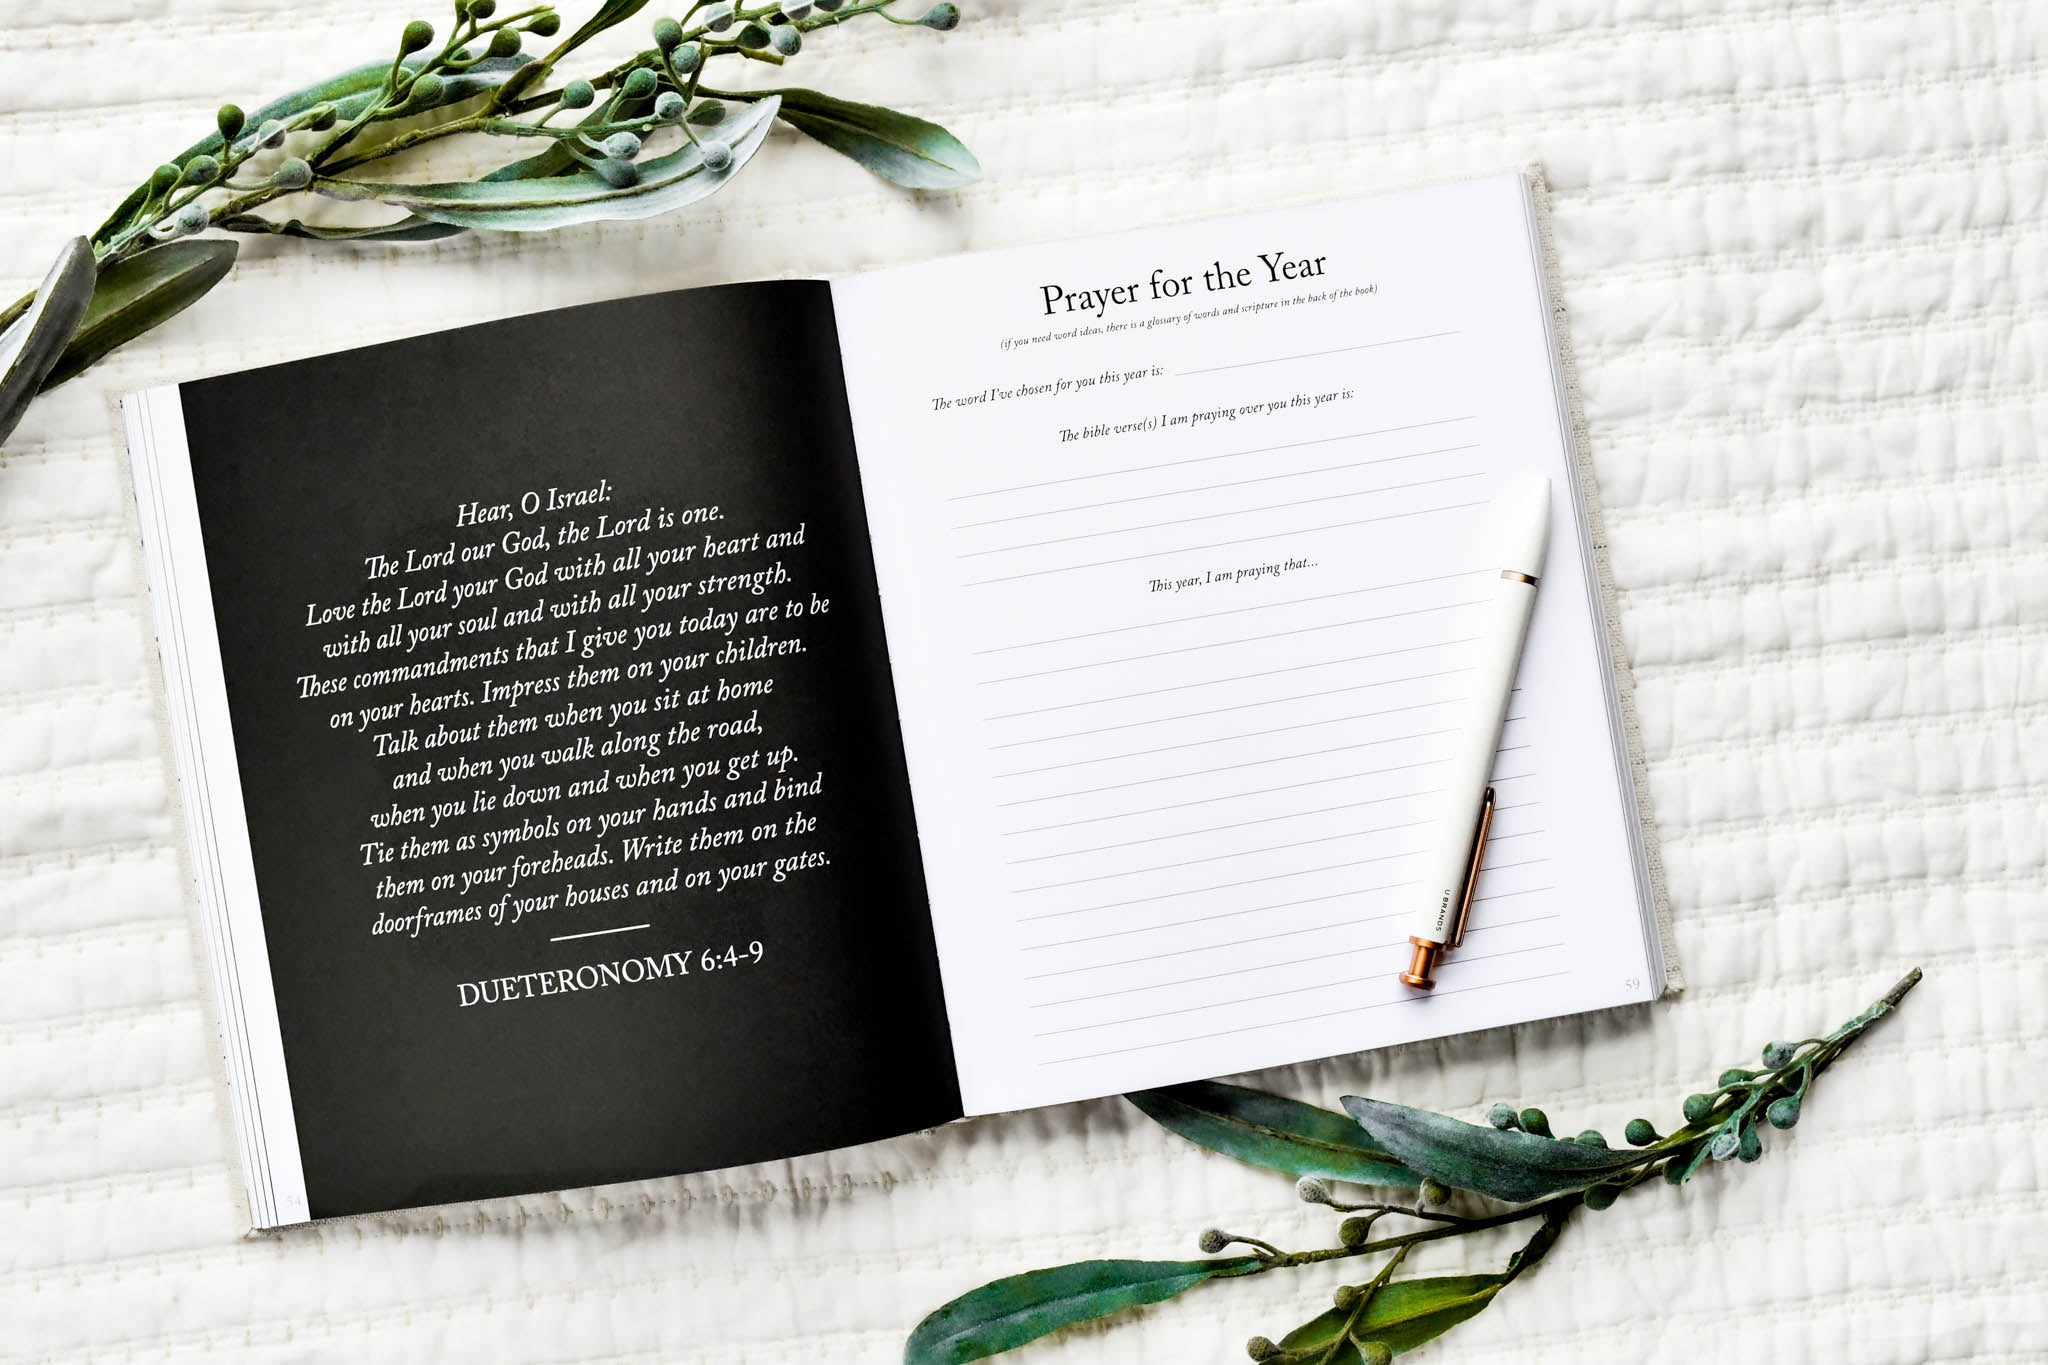 Dear Daughter: A Prompted Prayer Journal &amp; Childhood Keepsake by Duncan &amp; Stone | Baby Boy Memory Book | Scrapbook Album for Milestones | New Mom Gift | Christening or Baptism Gift | Baby Boy Scrapbook Album | Personalized Childhood Book